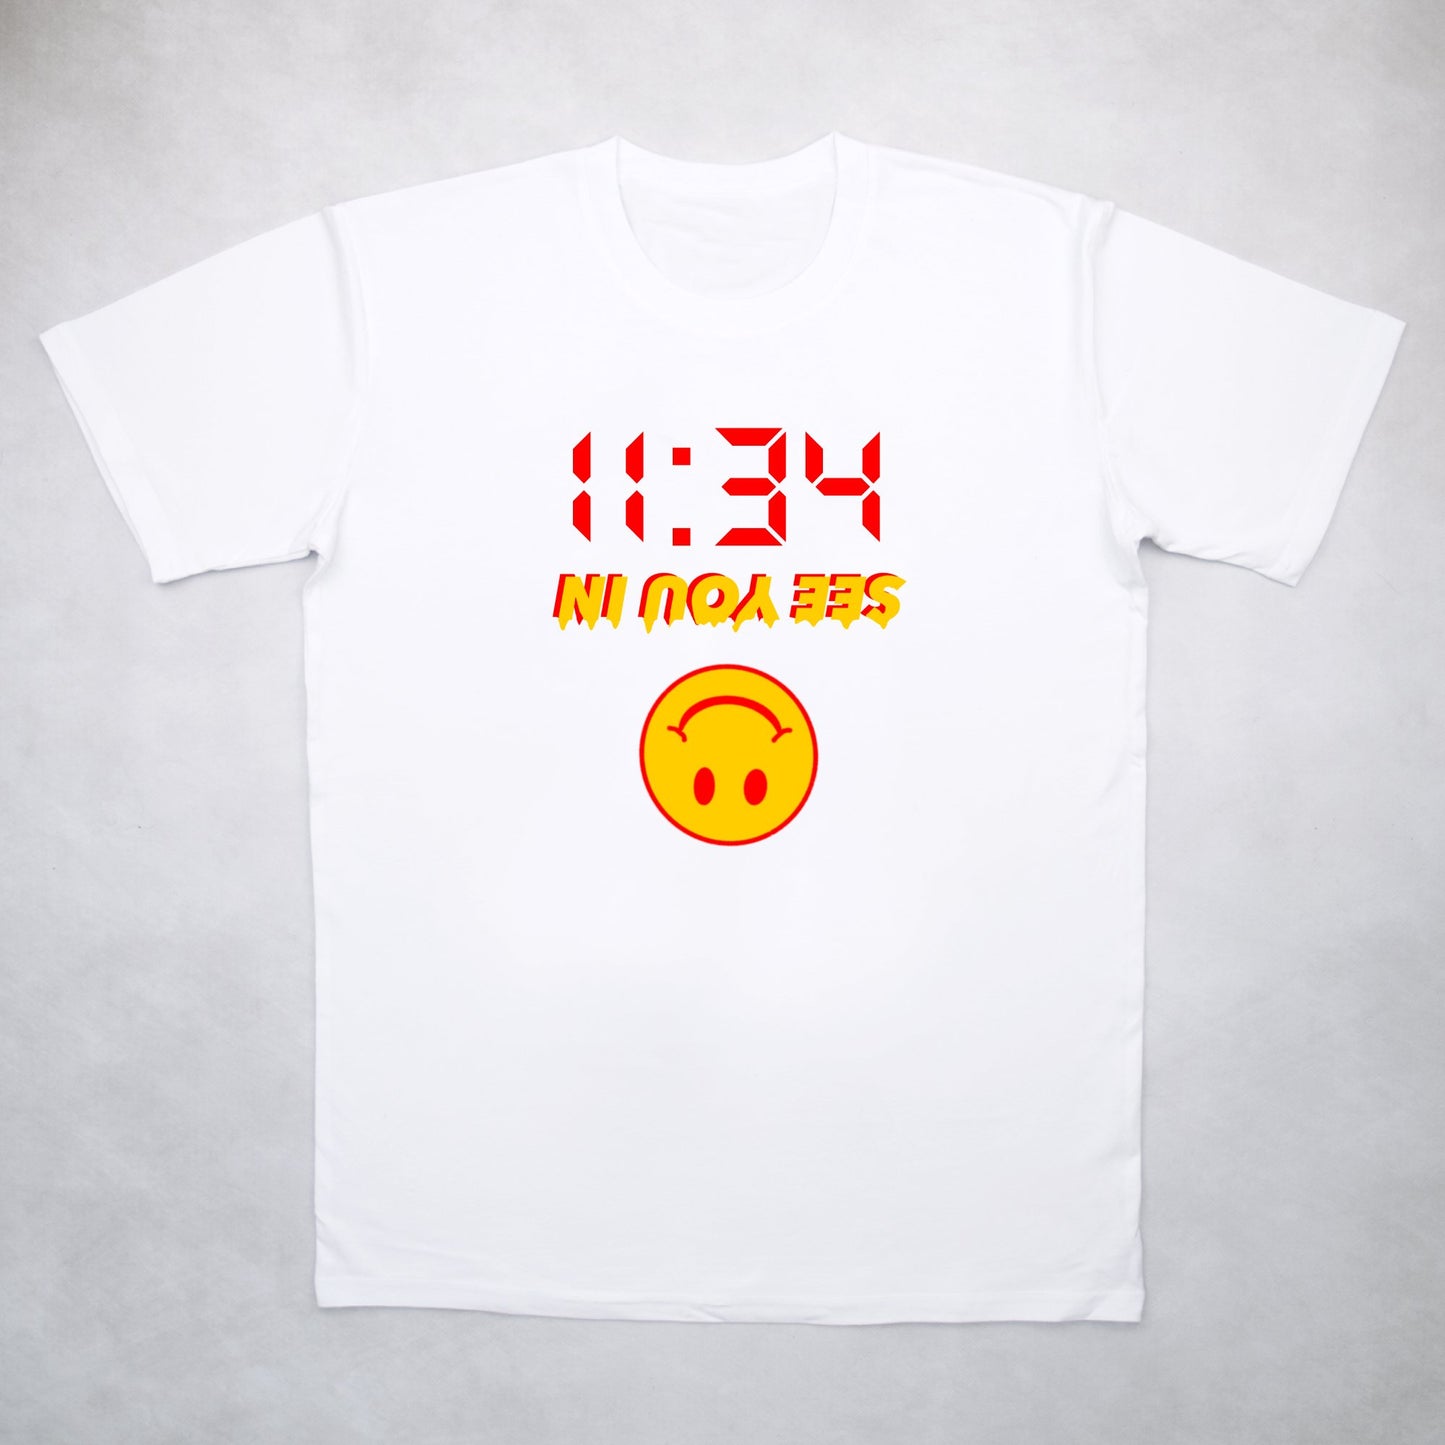 See You In 11:34 Tee